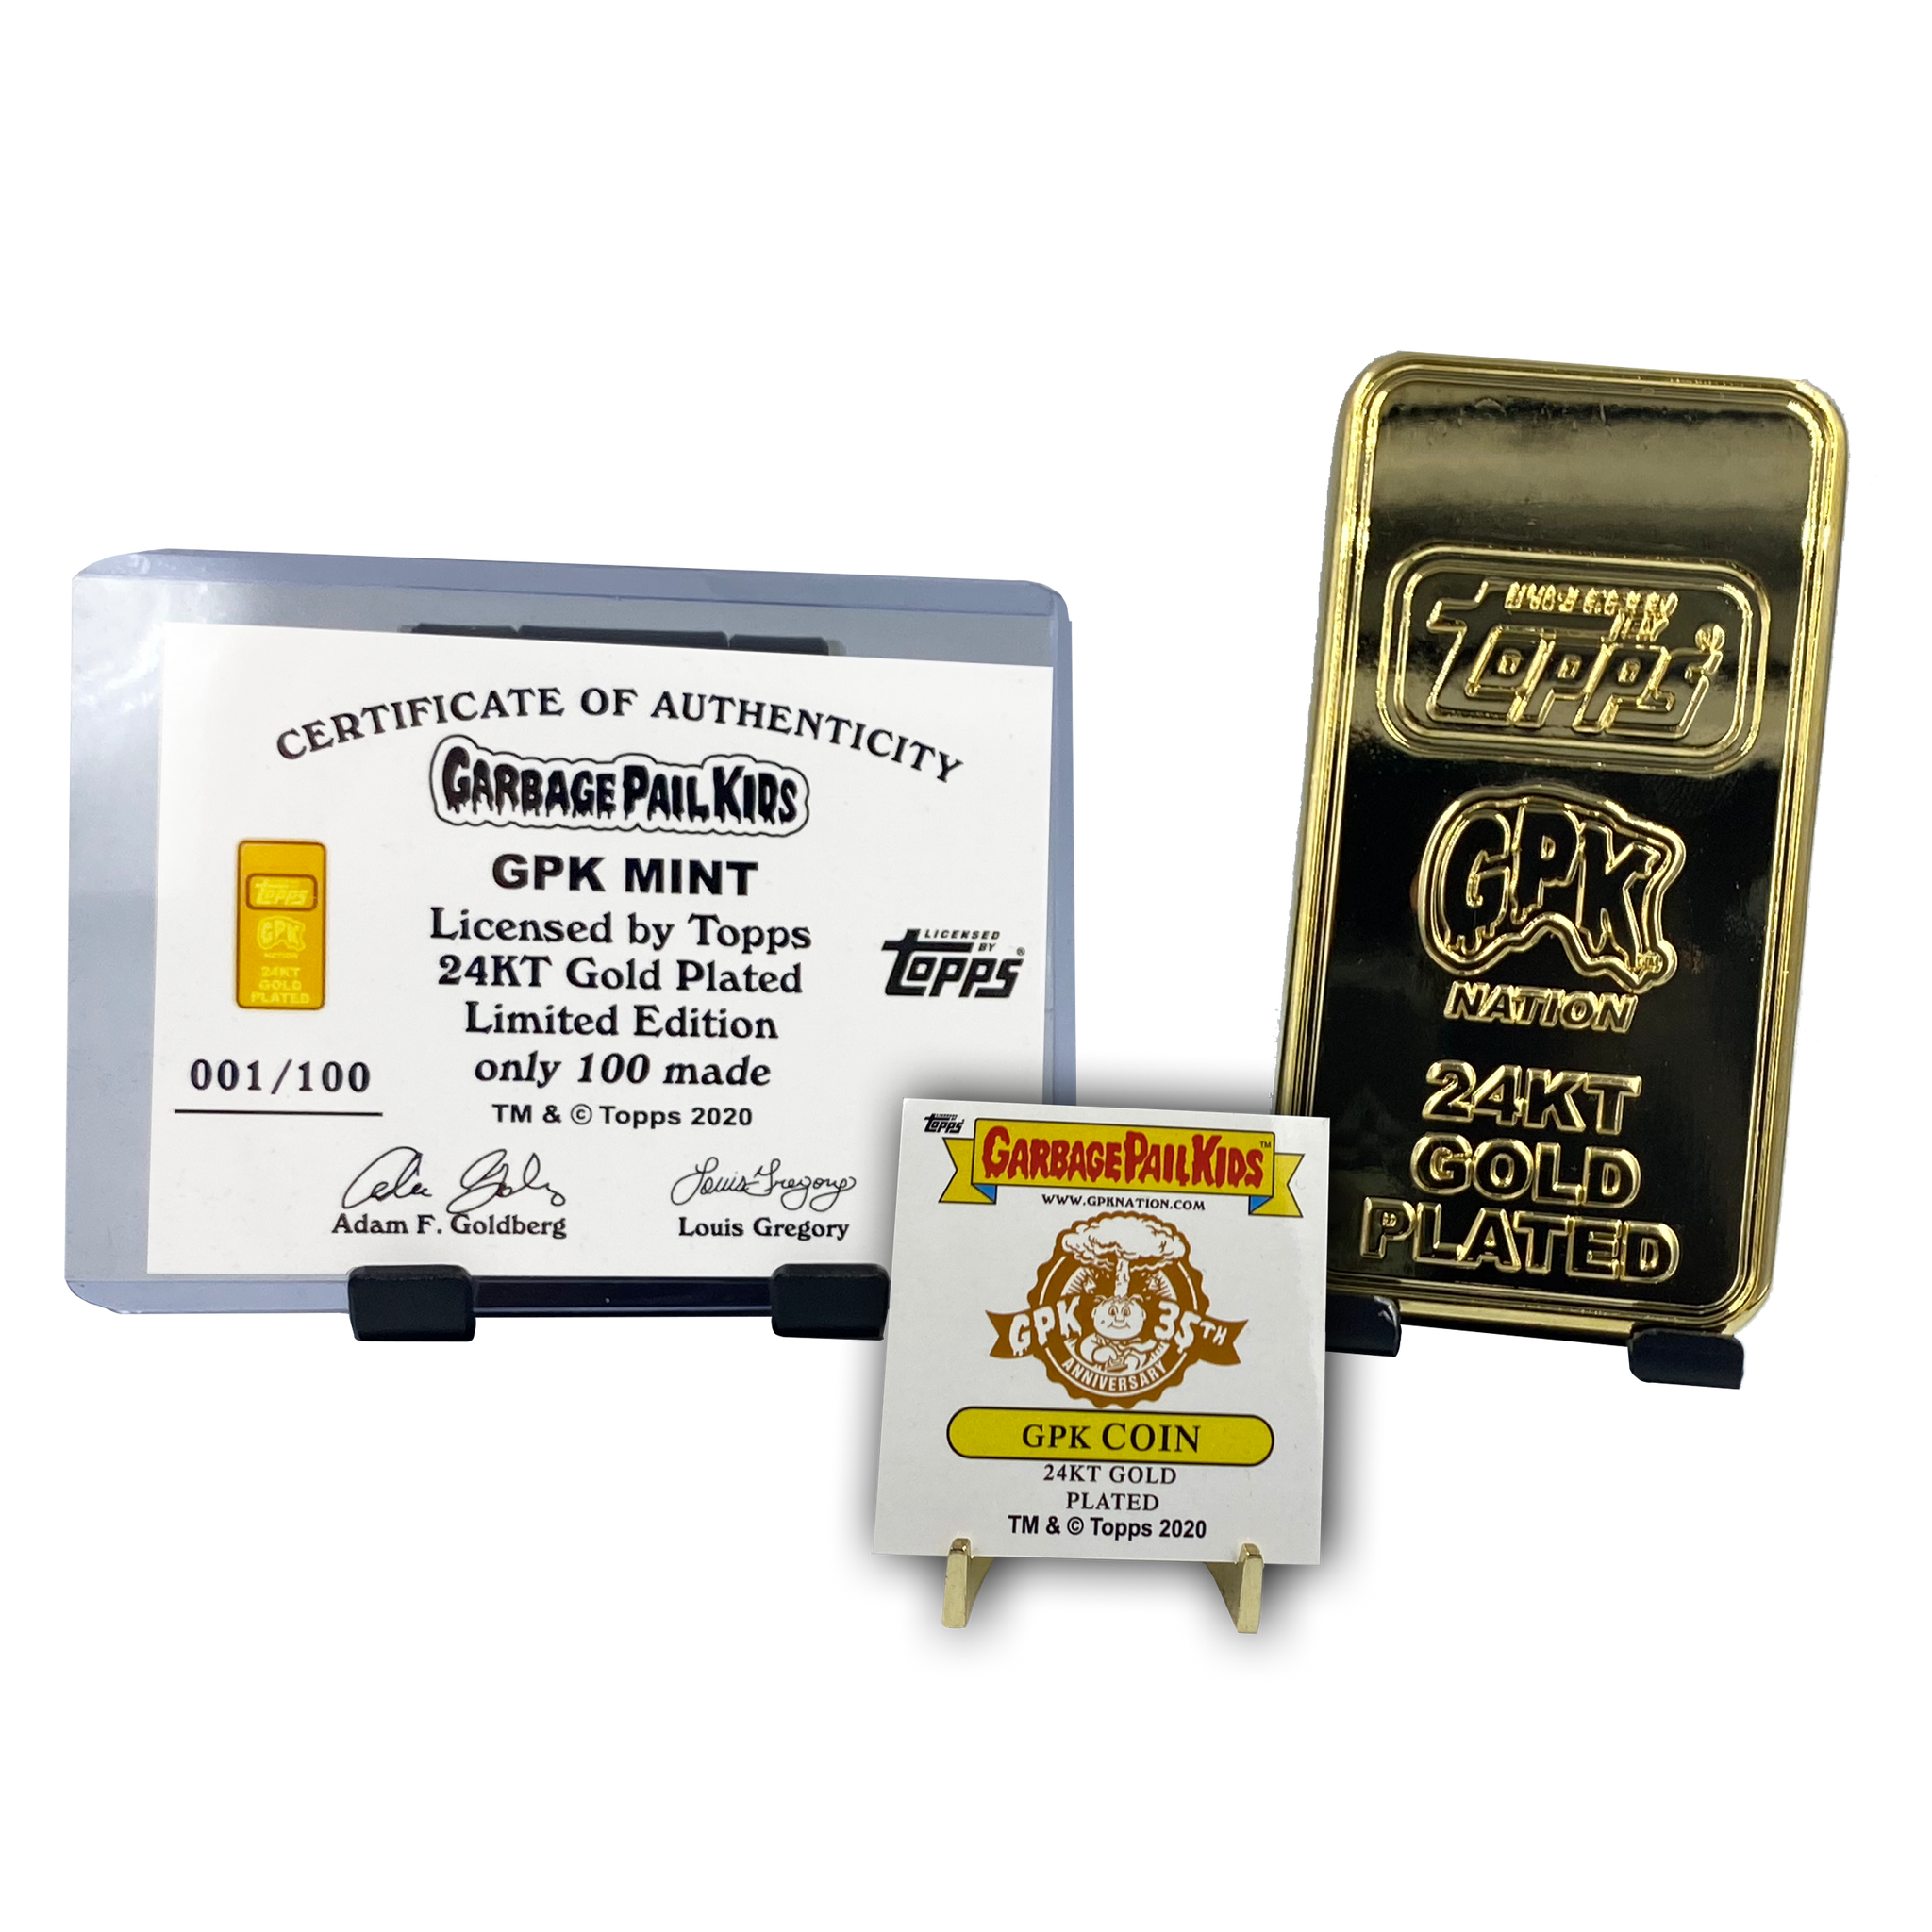 GPK Mint Gold Bar **INCREMENT 3** Officially Licensed by Topps 24KT Gold plated Garbage Pail Kids